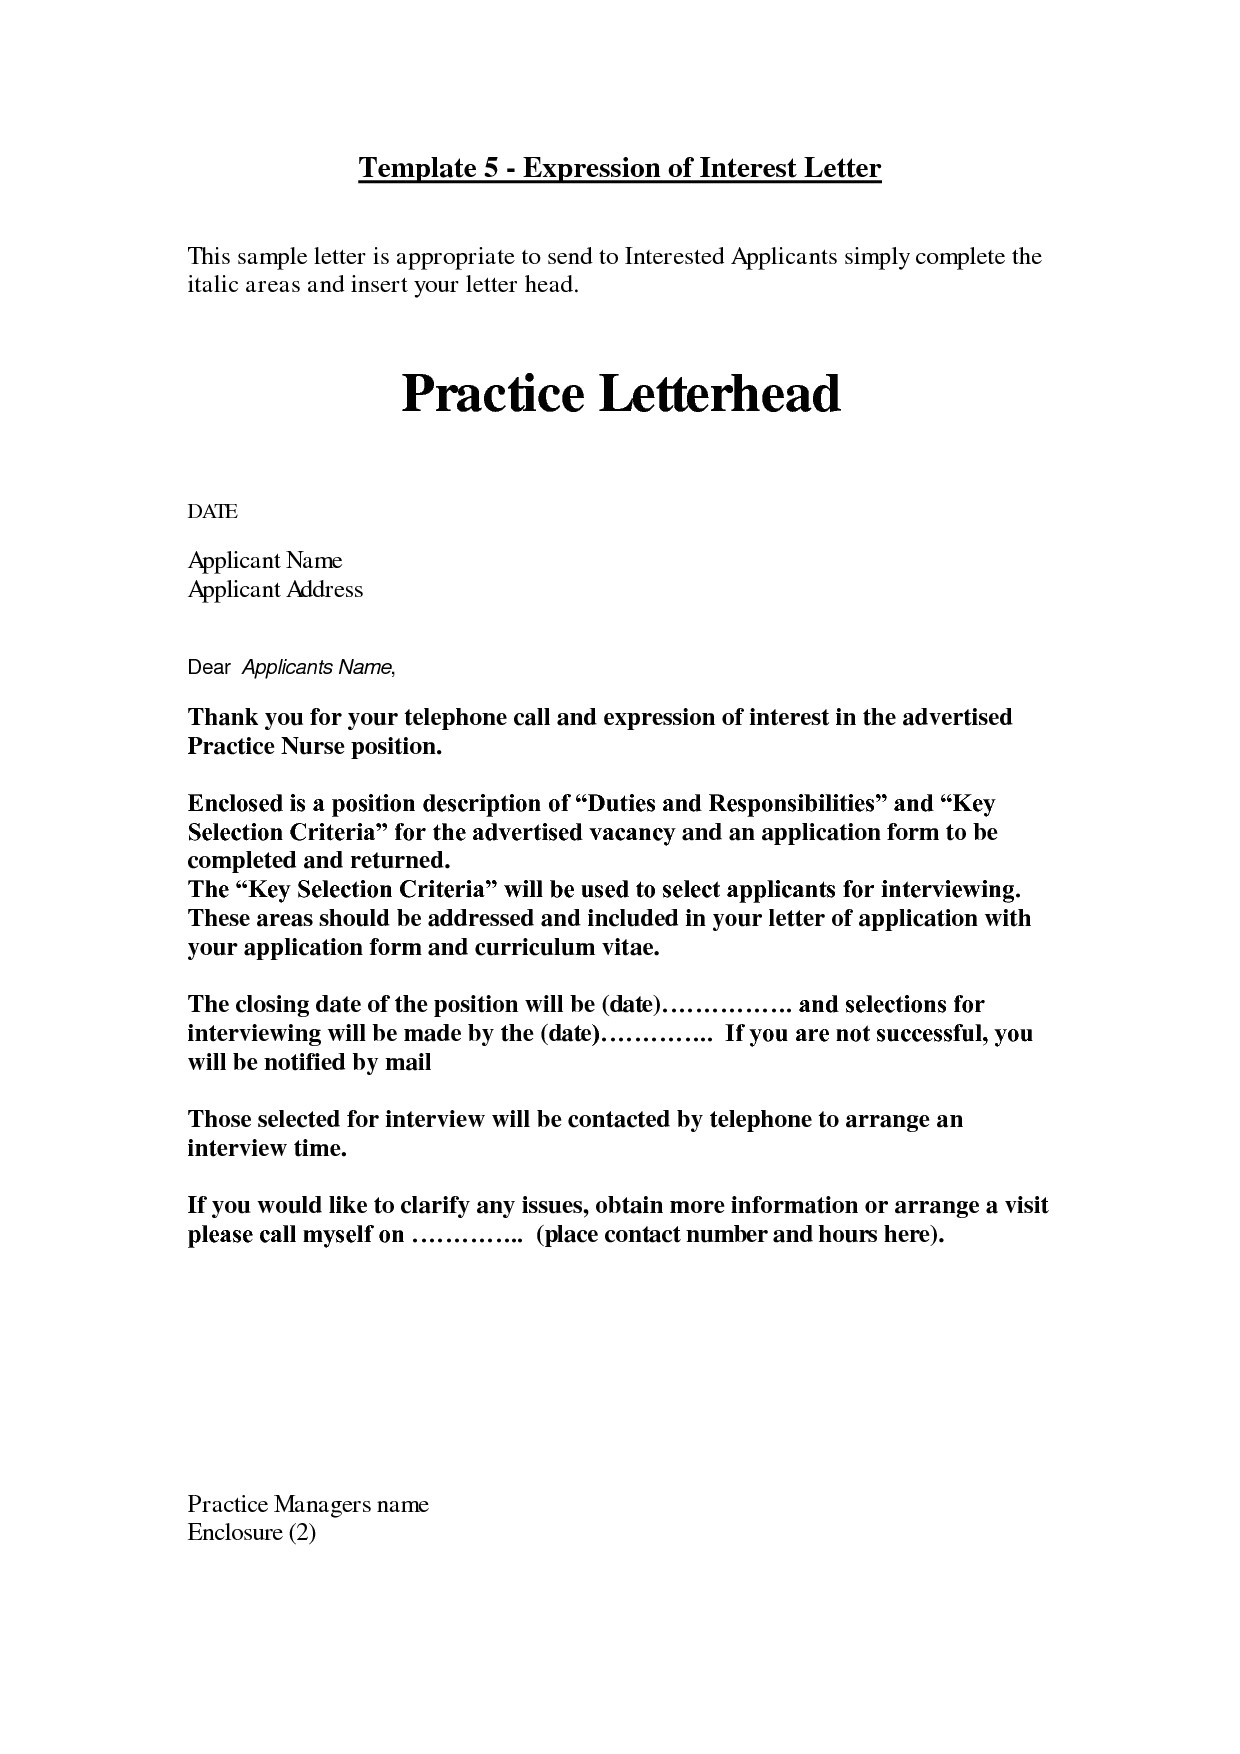 how to write a expression of interest letter cover letter of interest template